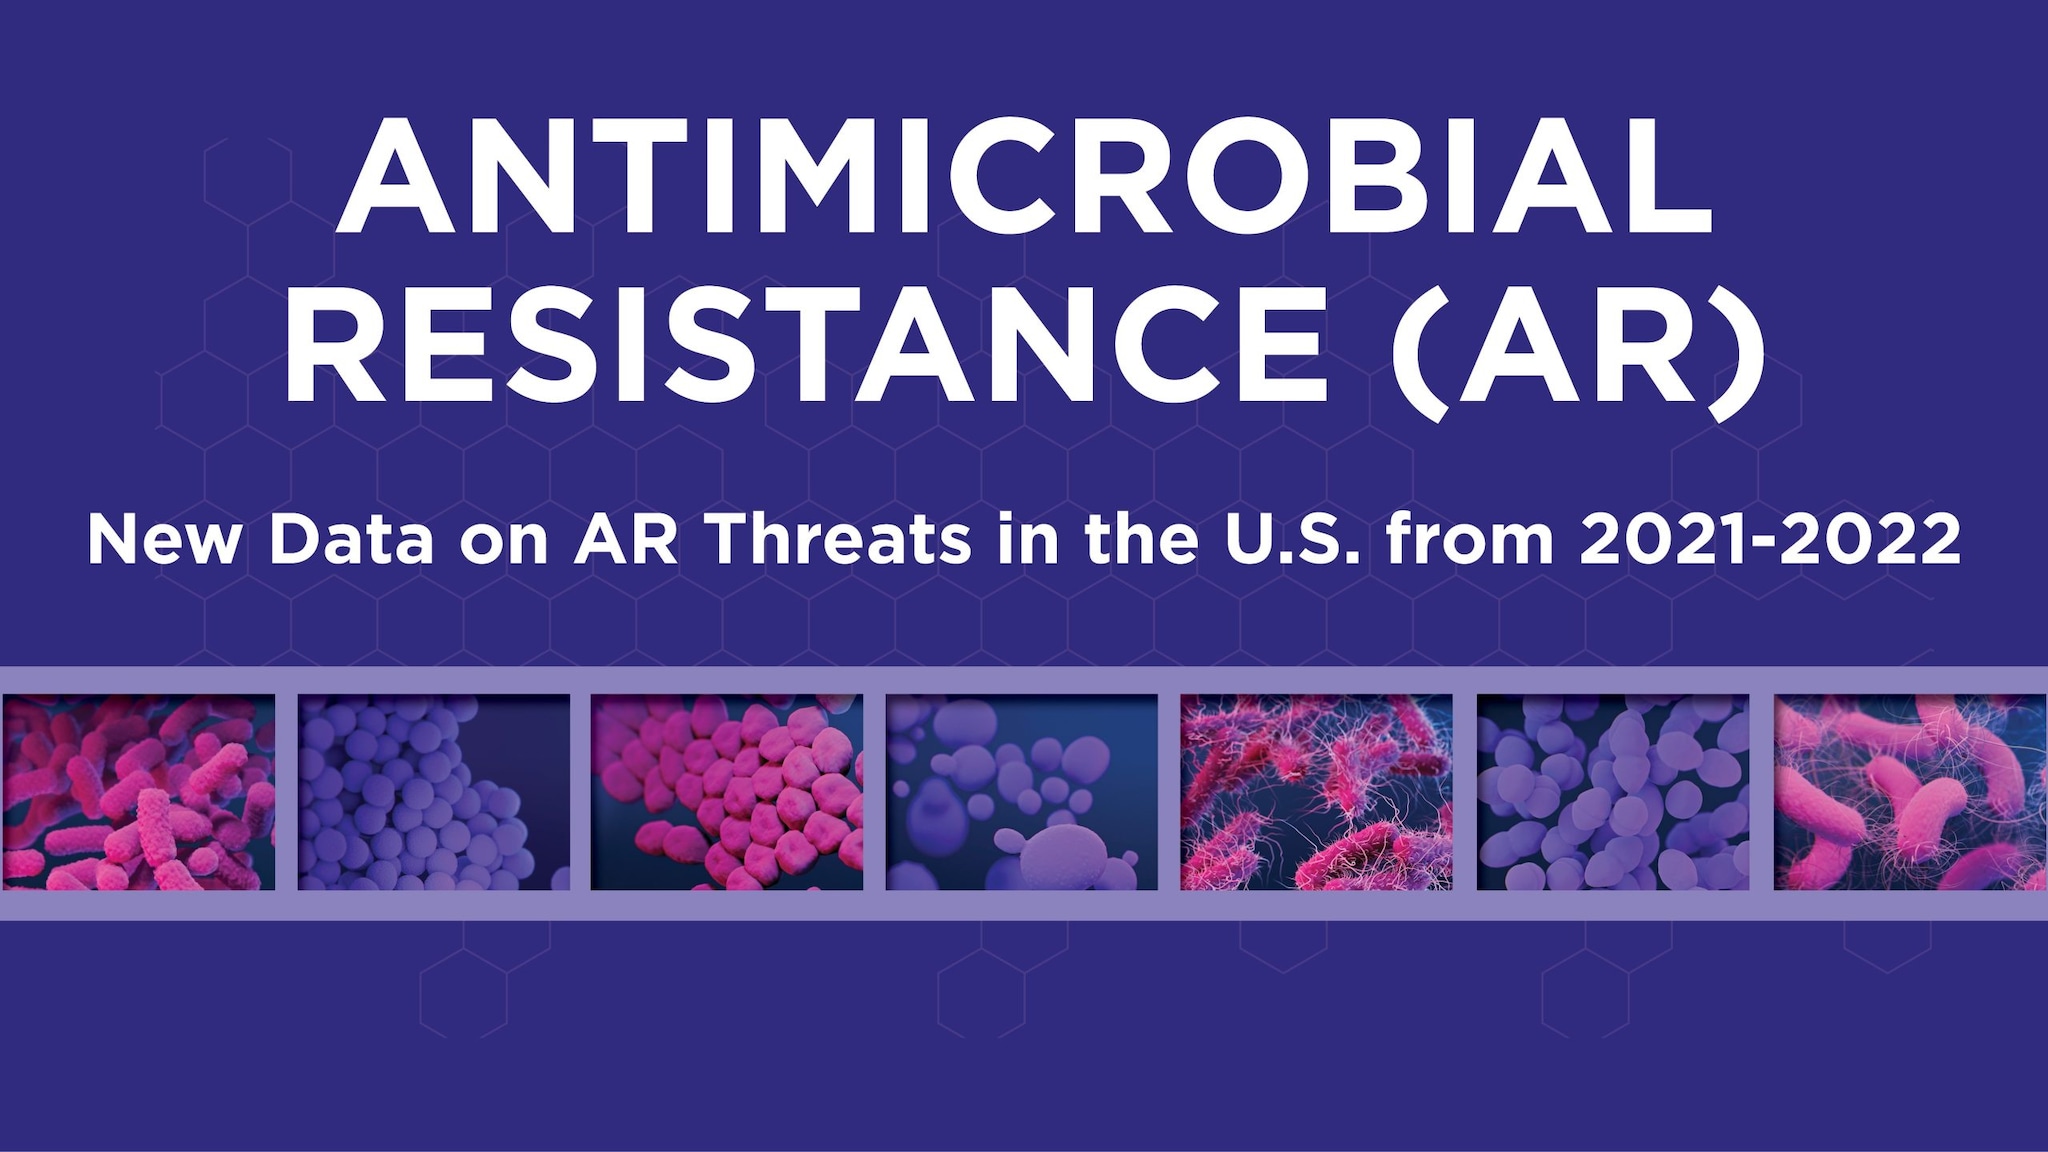 Antimicrobial Resistance (AR). New data on AR threats in the U.S. from 2021-2022.